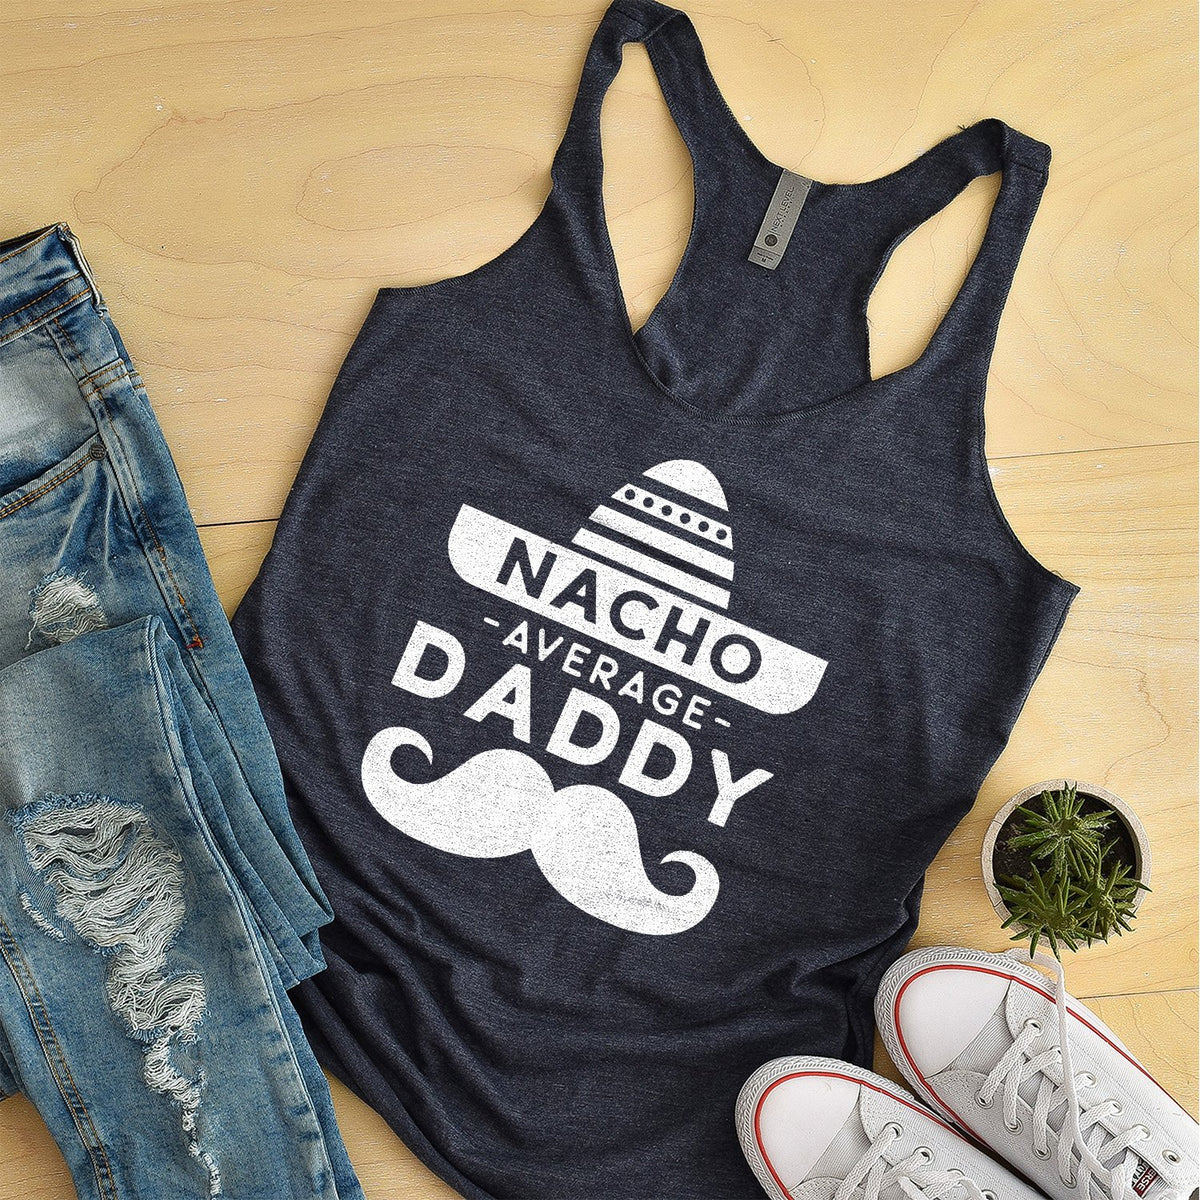 Nacho Average Daddy with Mustache - Tank Top Racerback